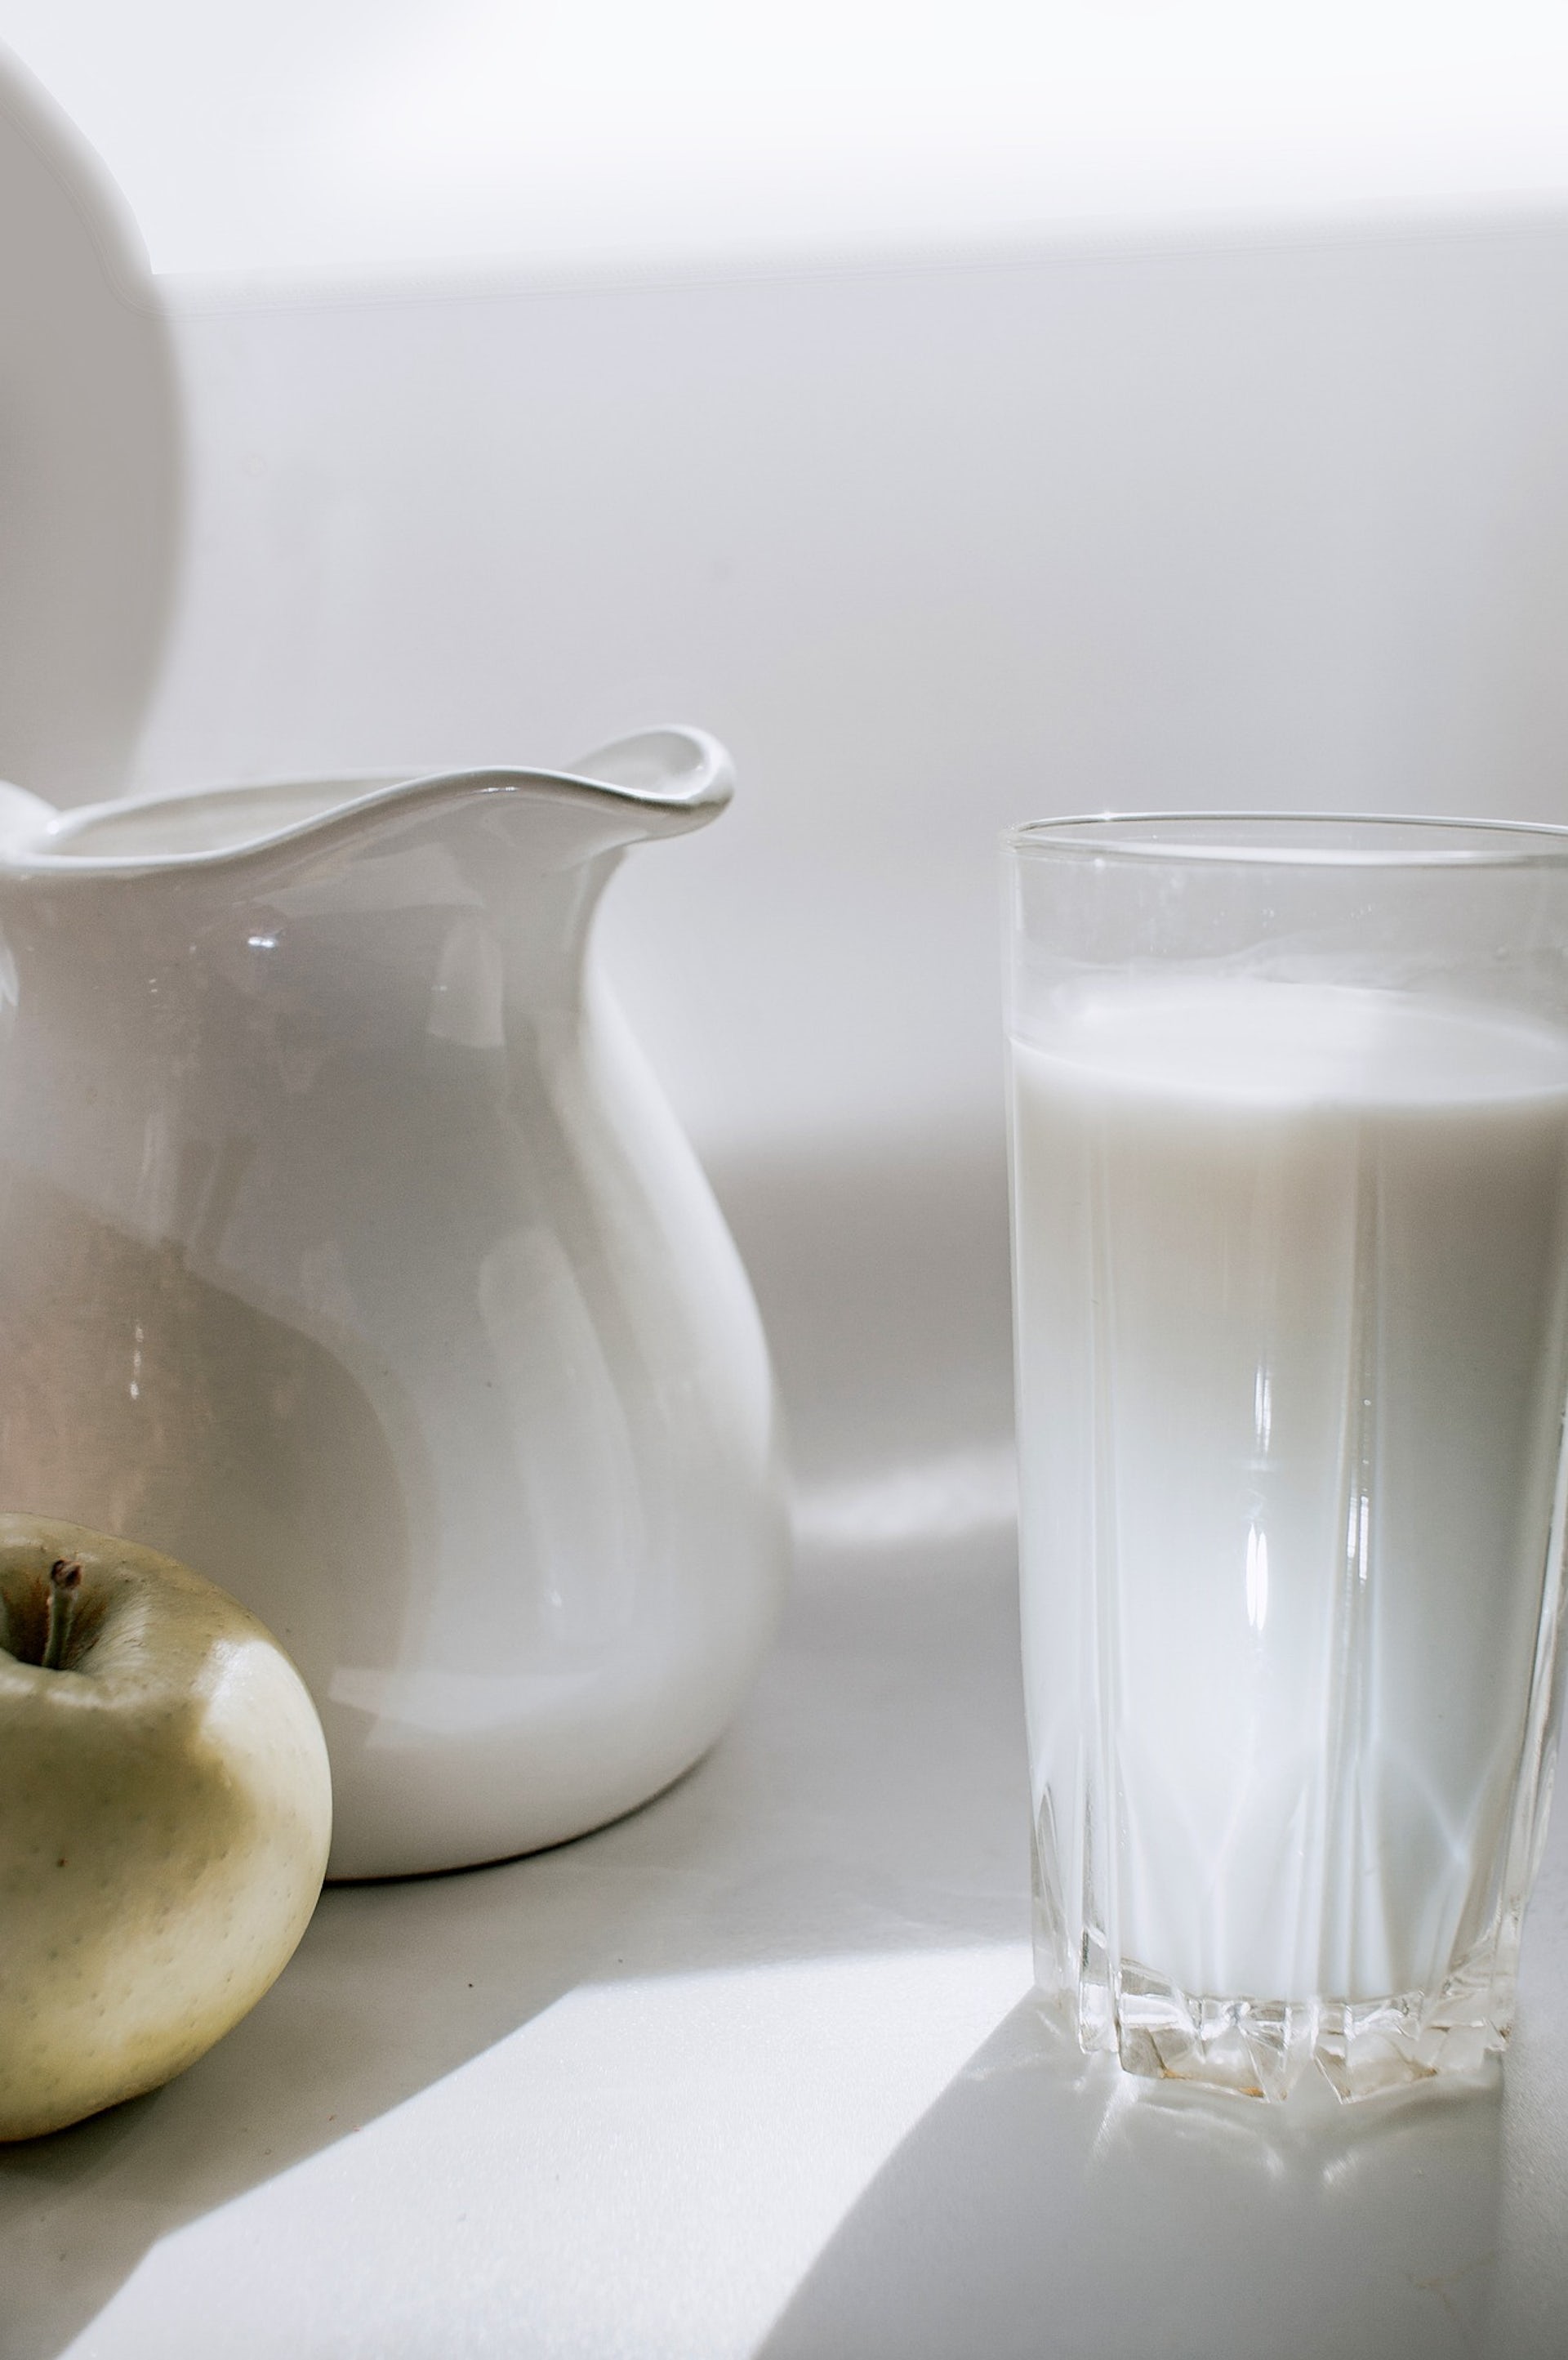 A pitcher and a glass of milk